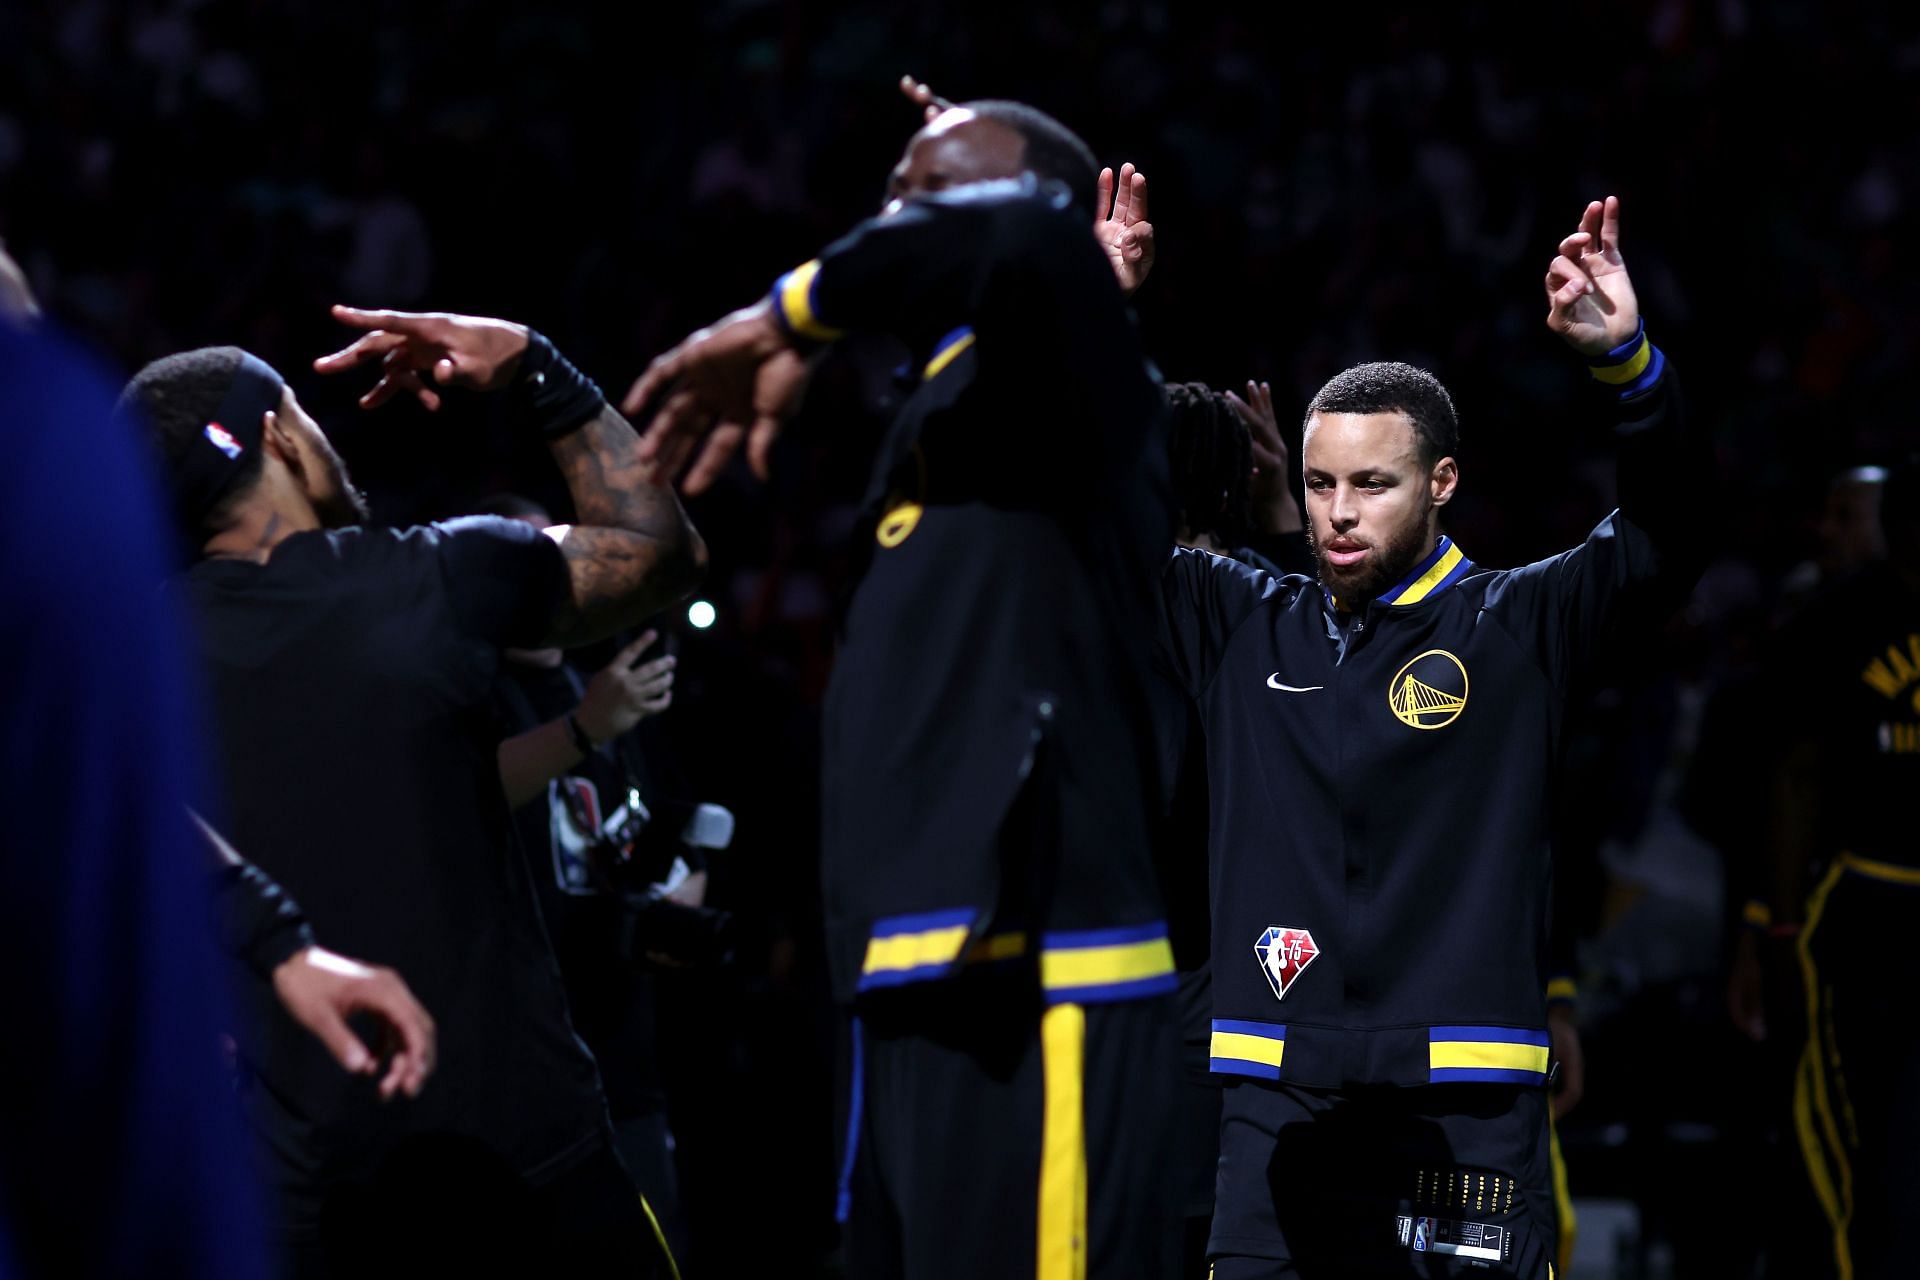 Golden State Warriors are just one win short of winning the NBA championship